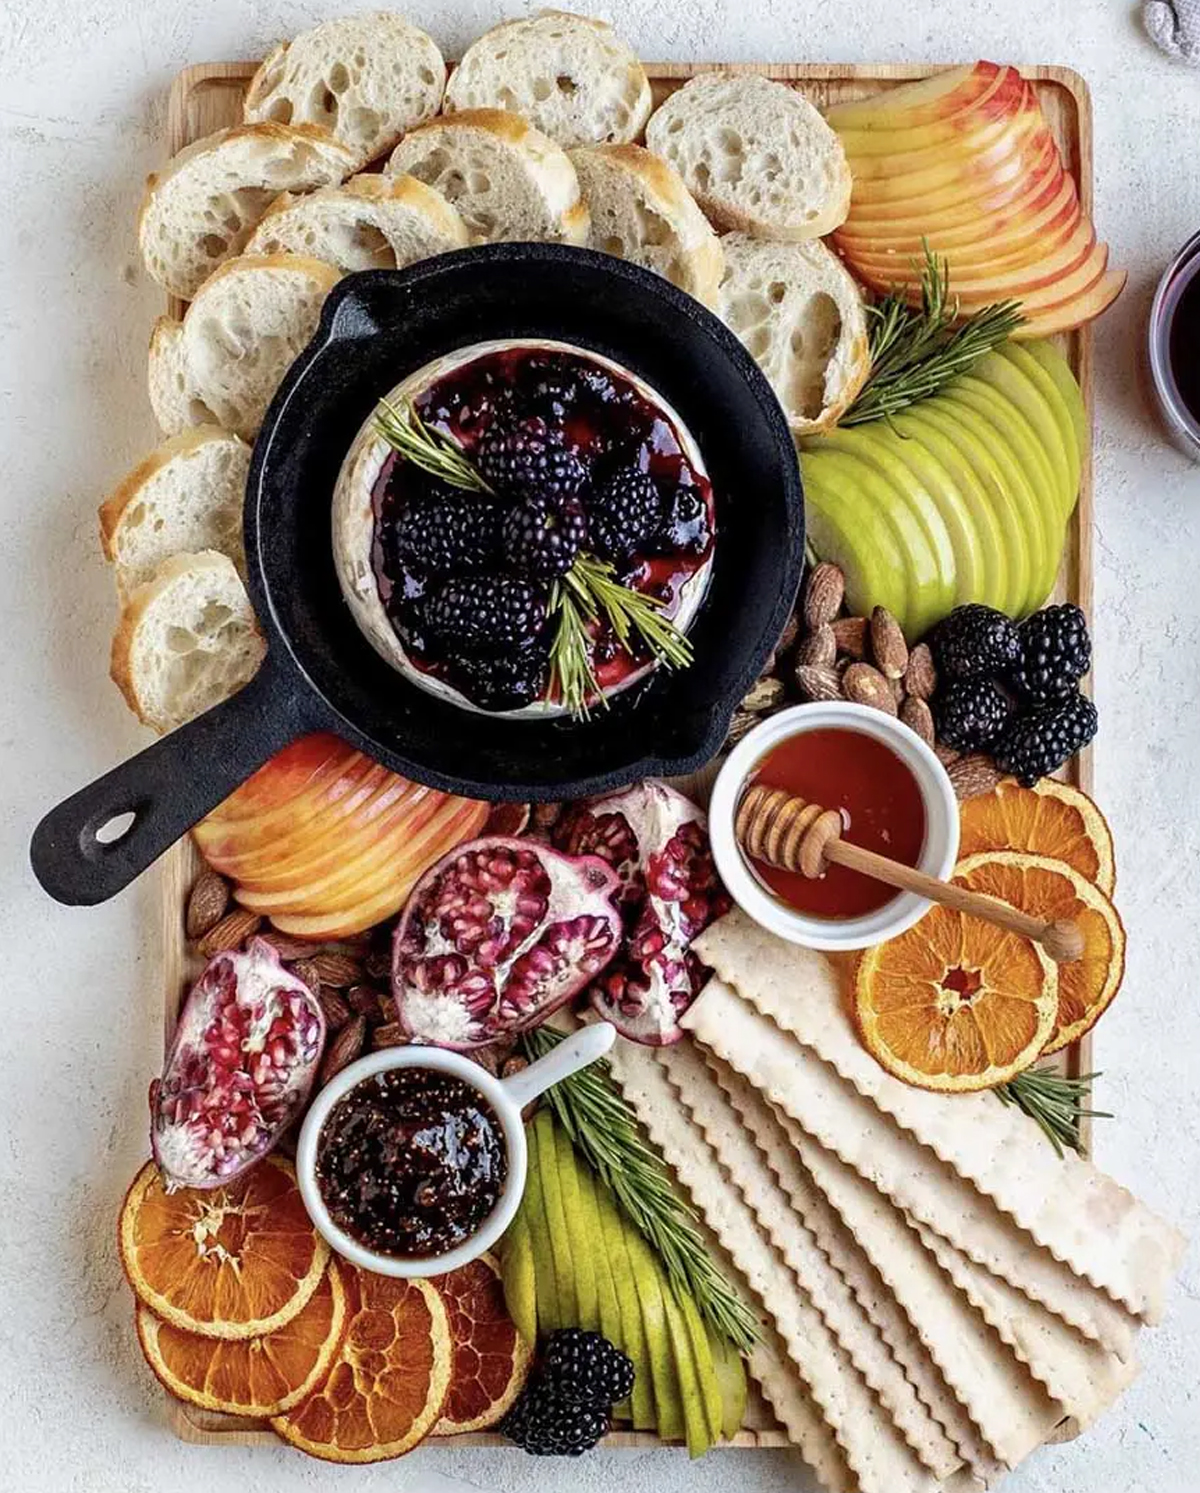 Ain't Too Proud to Meg's board displays brie,, fig jam, apples, bread, and berries.